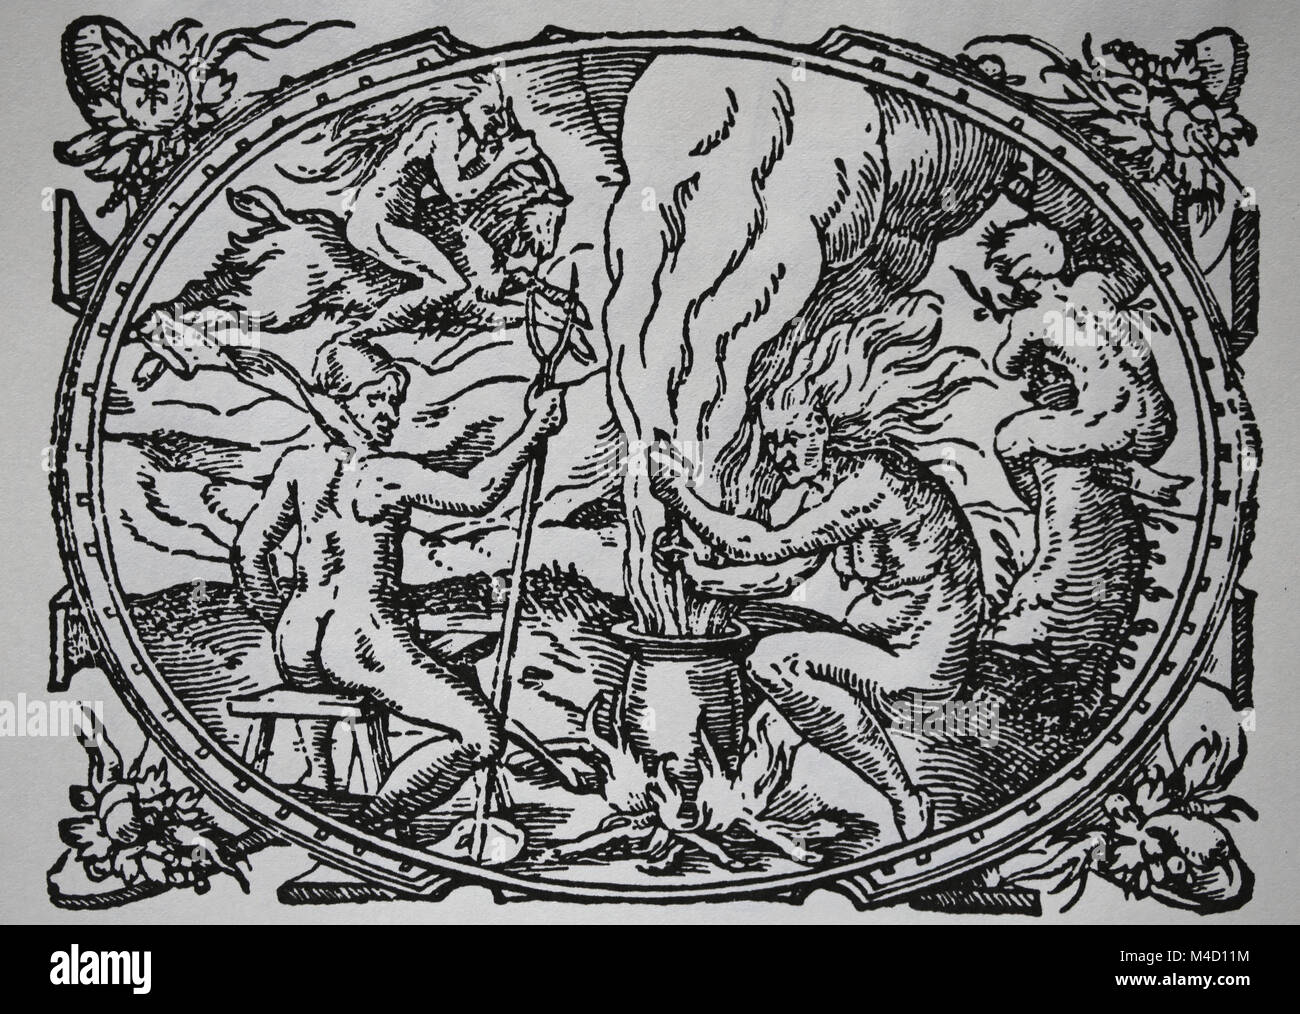 Witches' brew. Engraving from A Shot,True Warning by Abraham Saur. 1582. Germany. Stock Photo